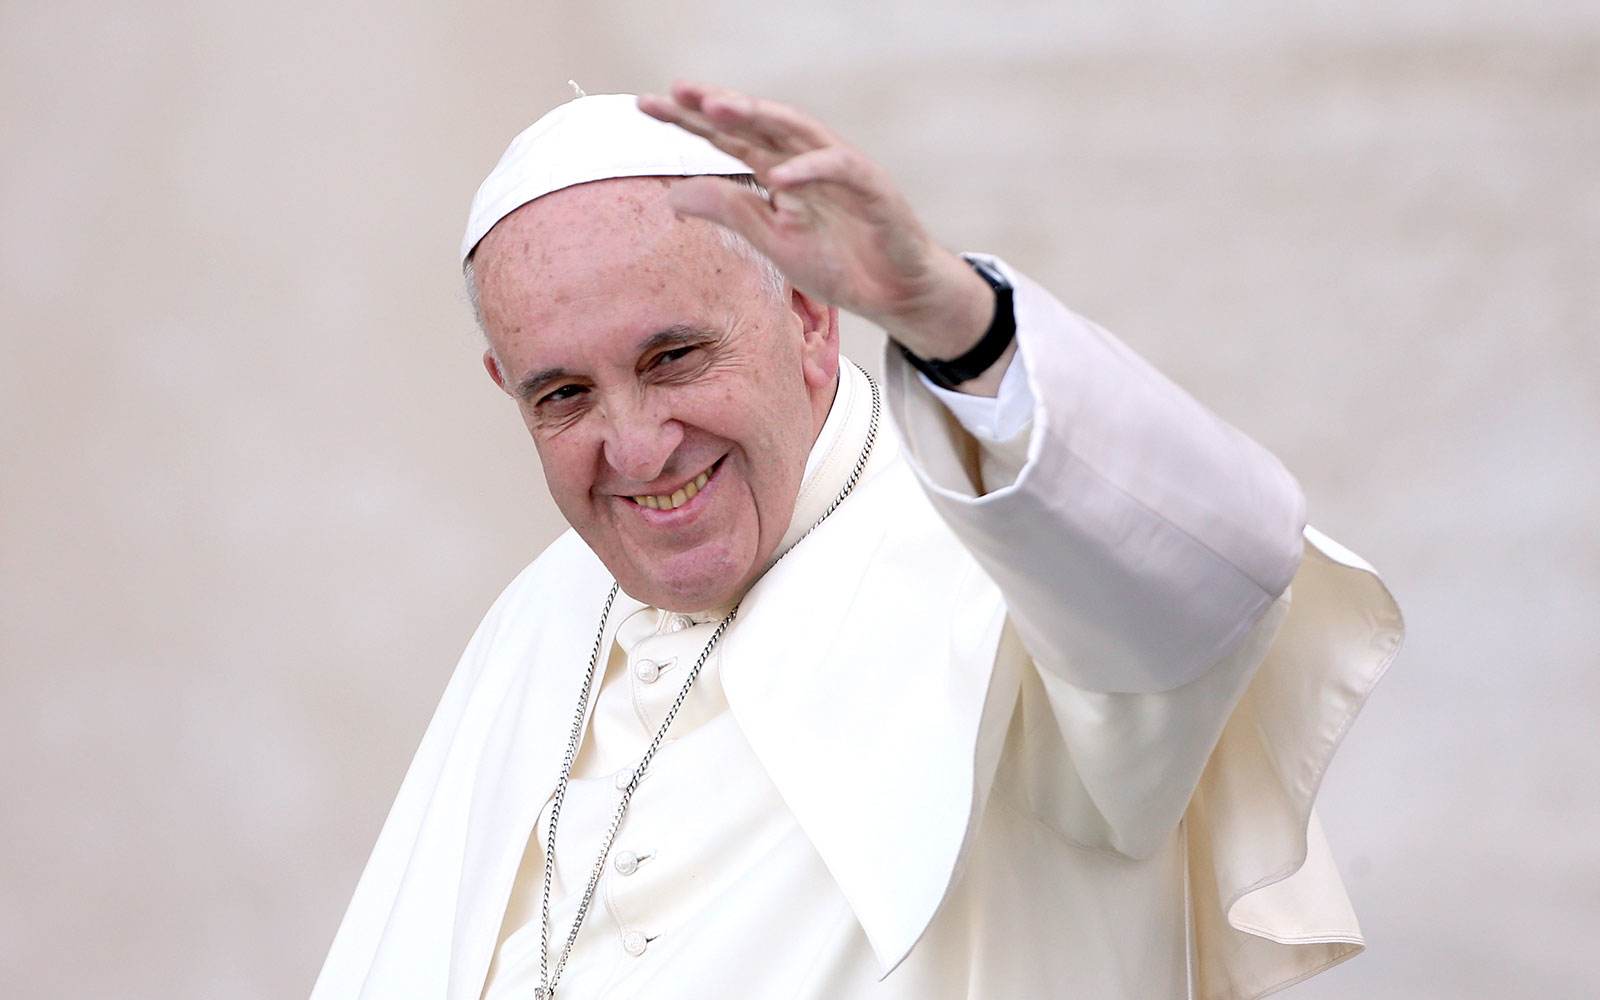 Pope Francis Will Travel Through Central Park On NYC Visit